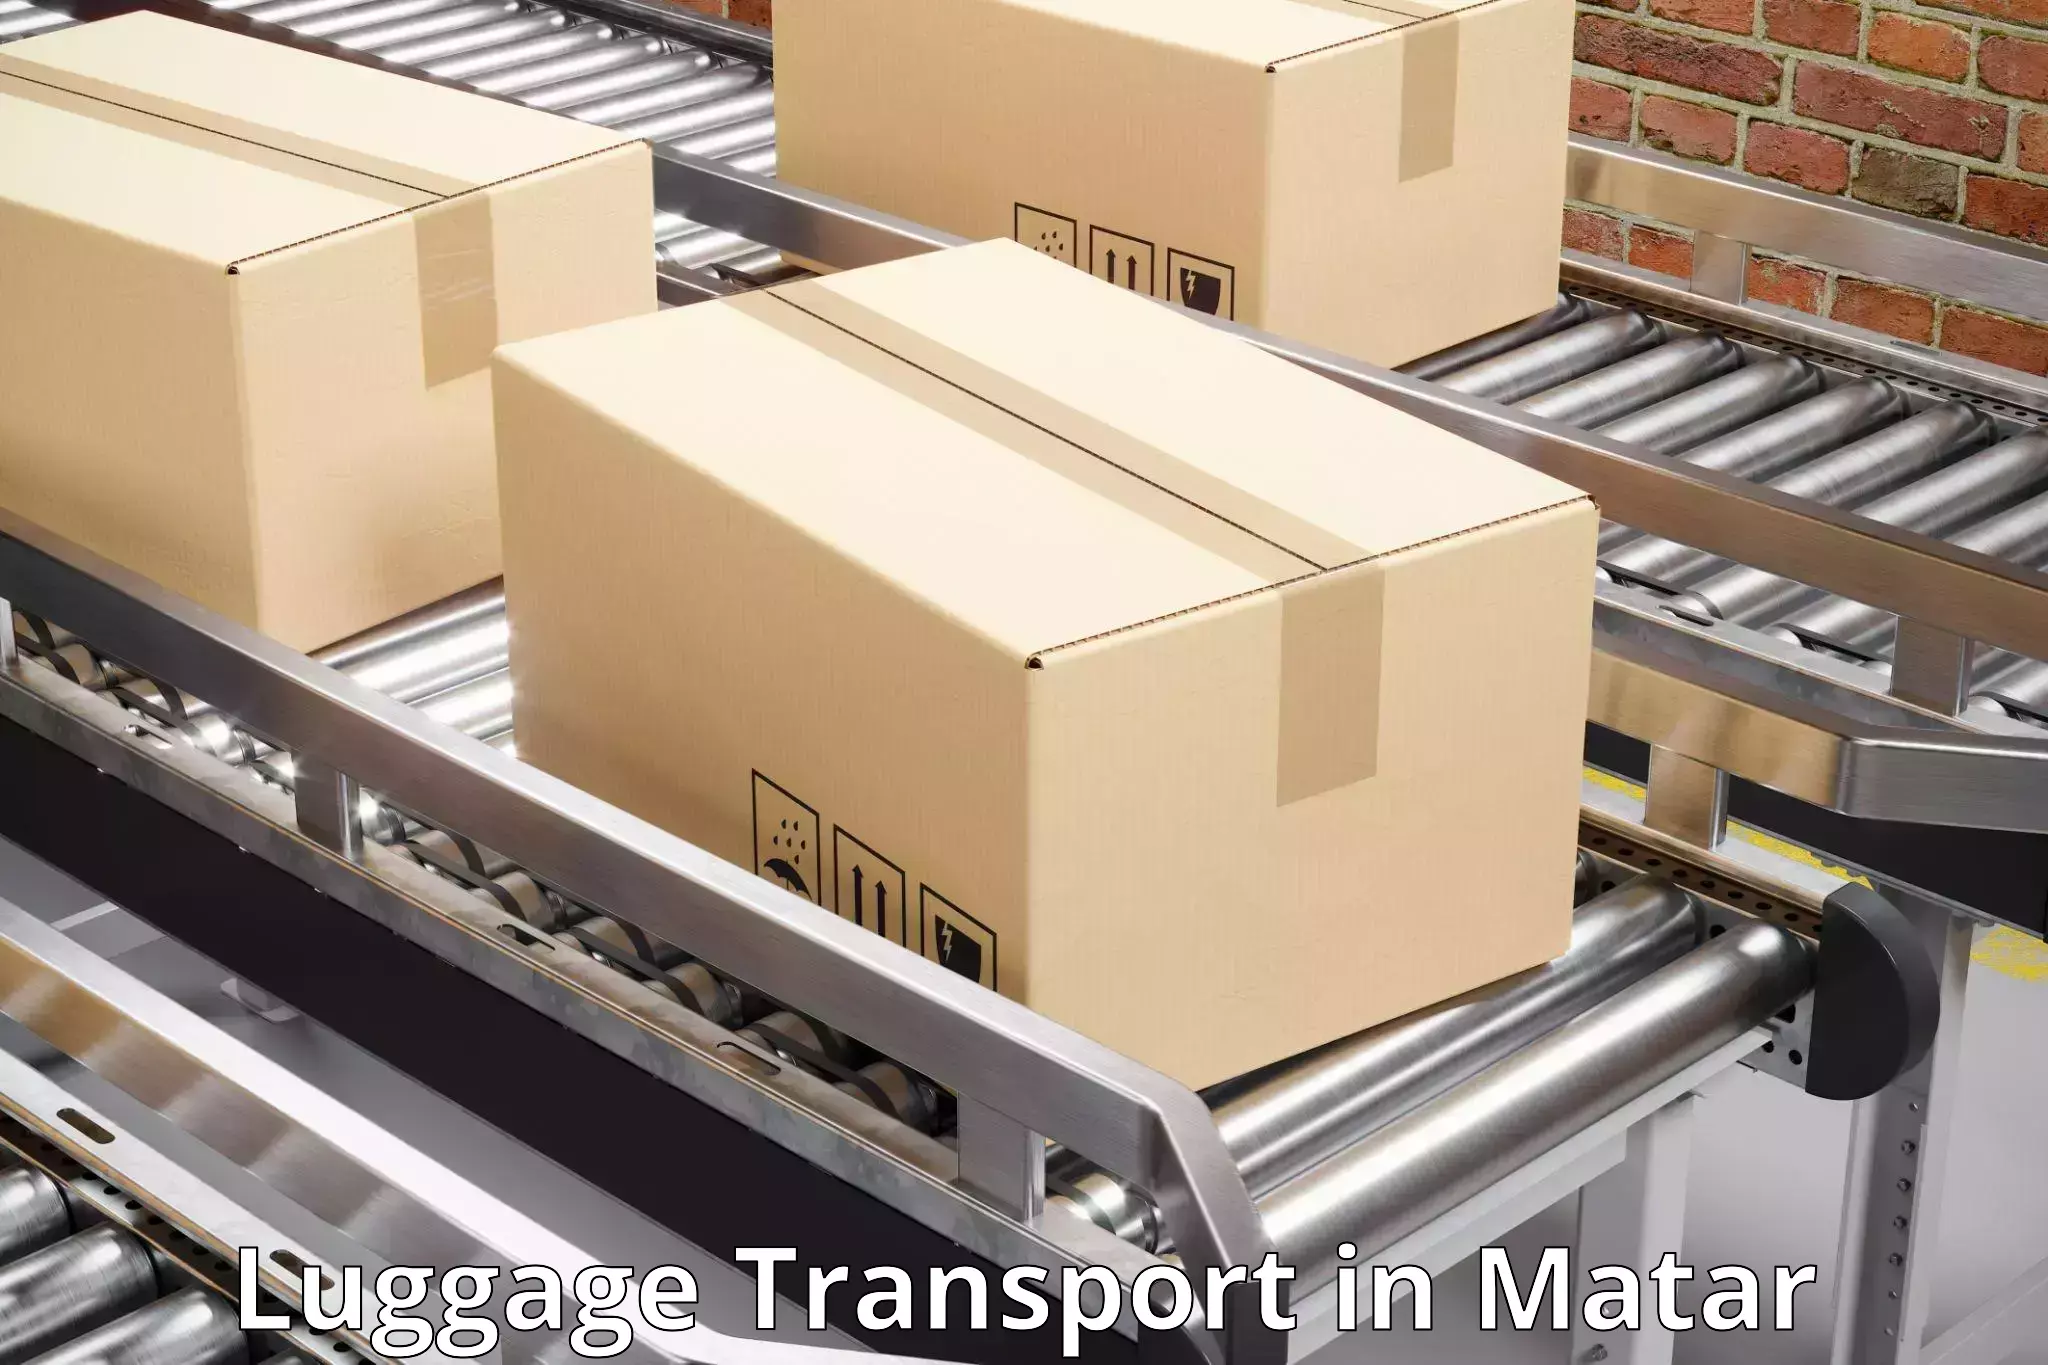 Baggage transport cost in Matar